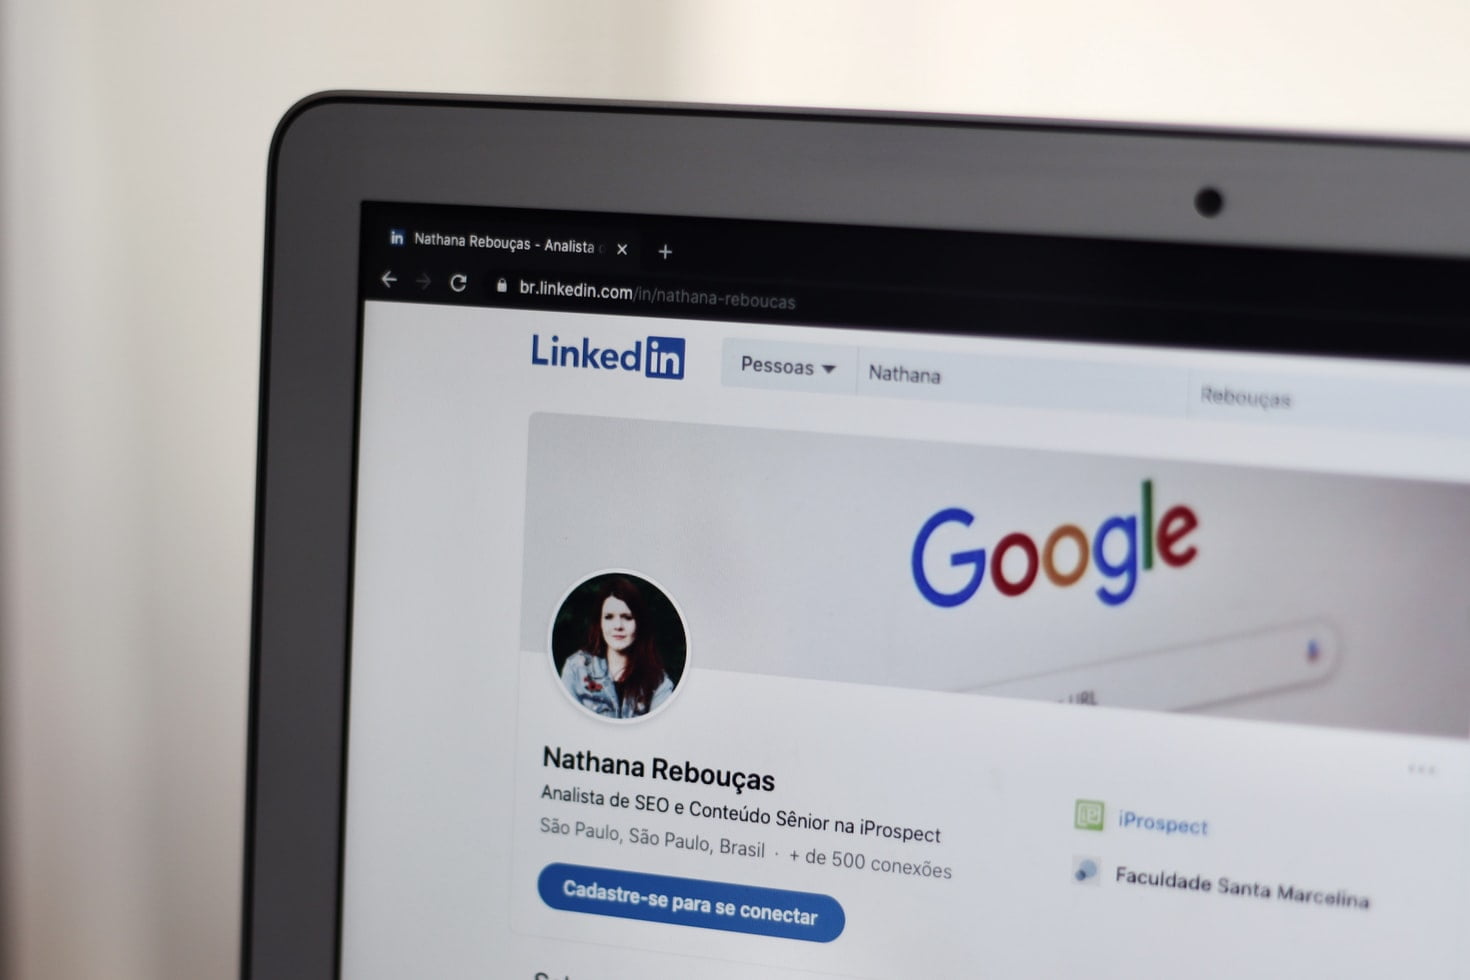 How to delete a LinkedIn account step by step